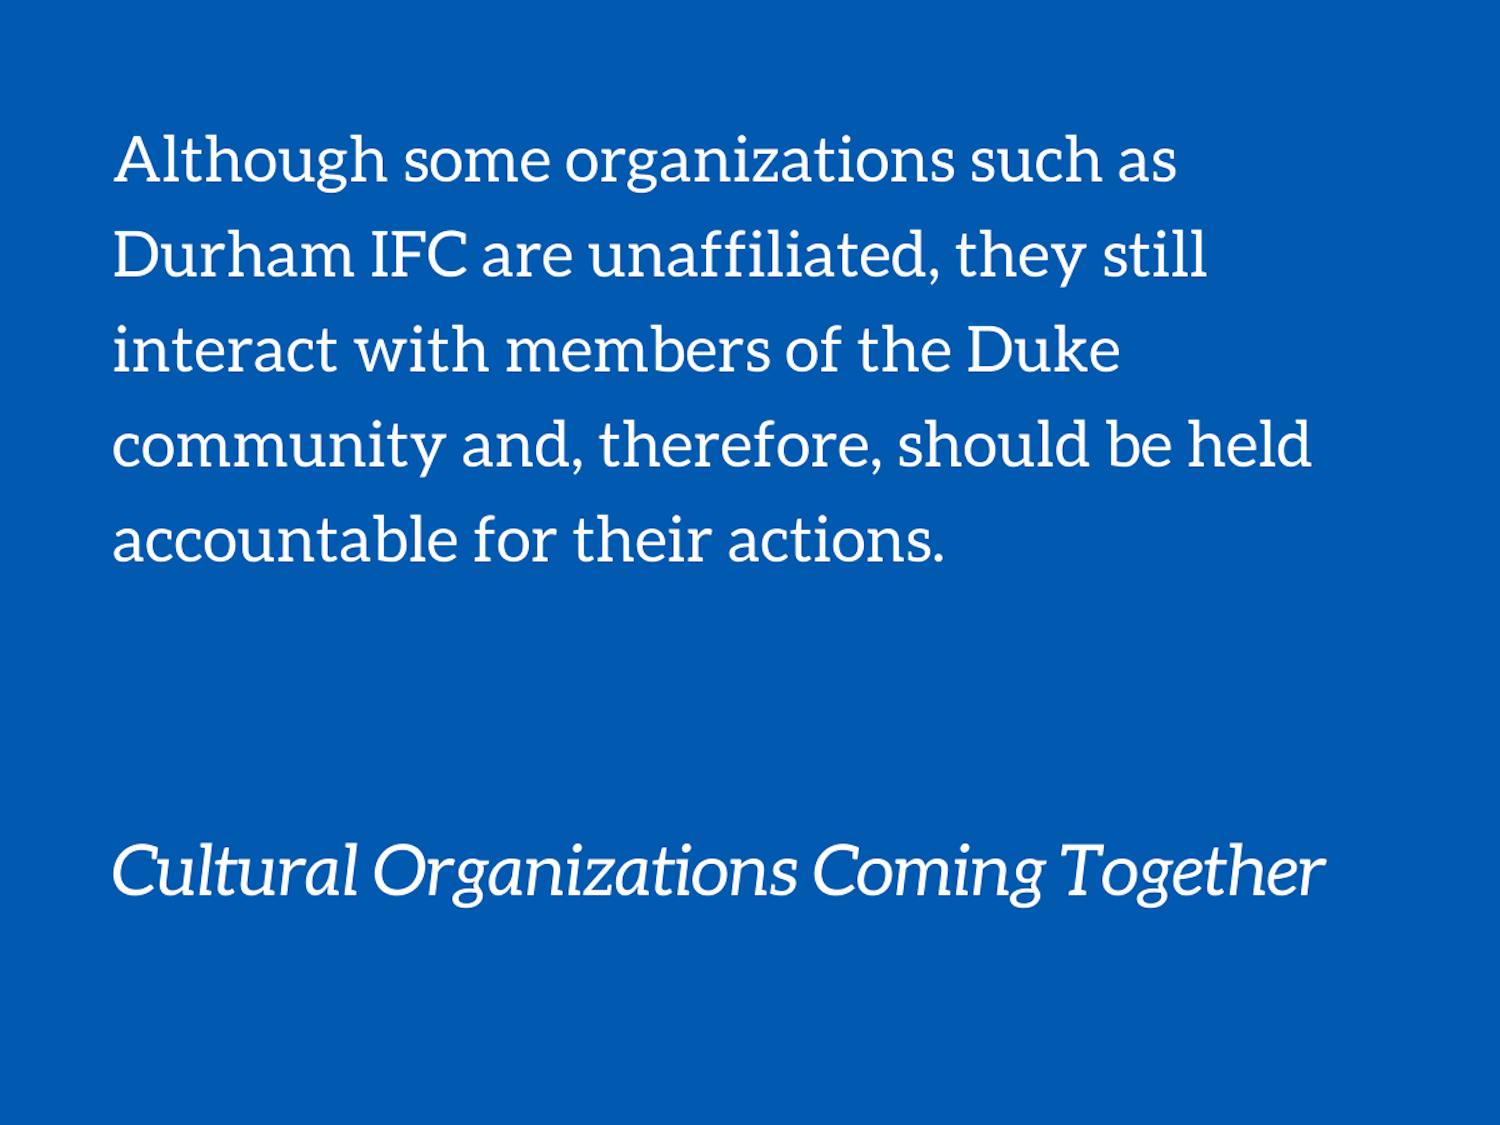 cultural organizations coming together